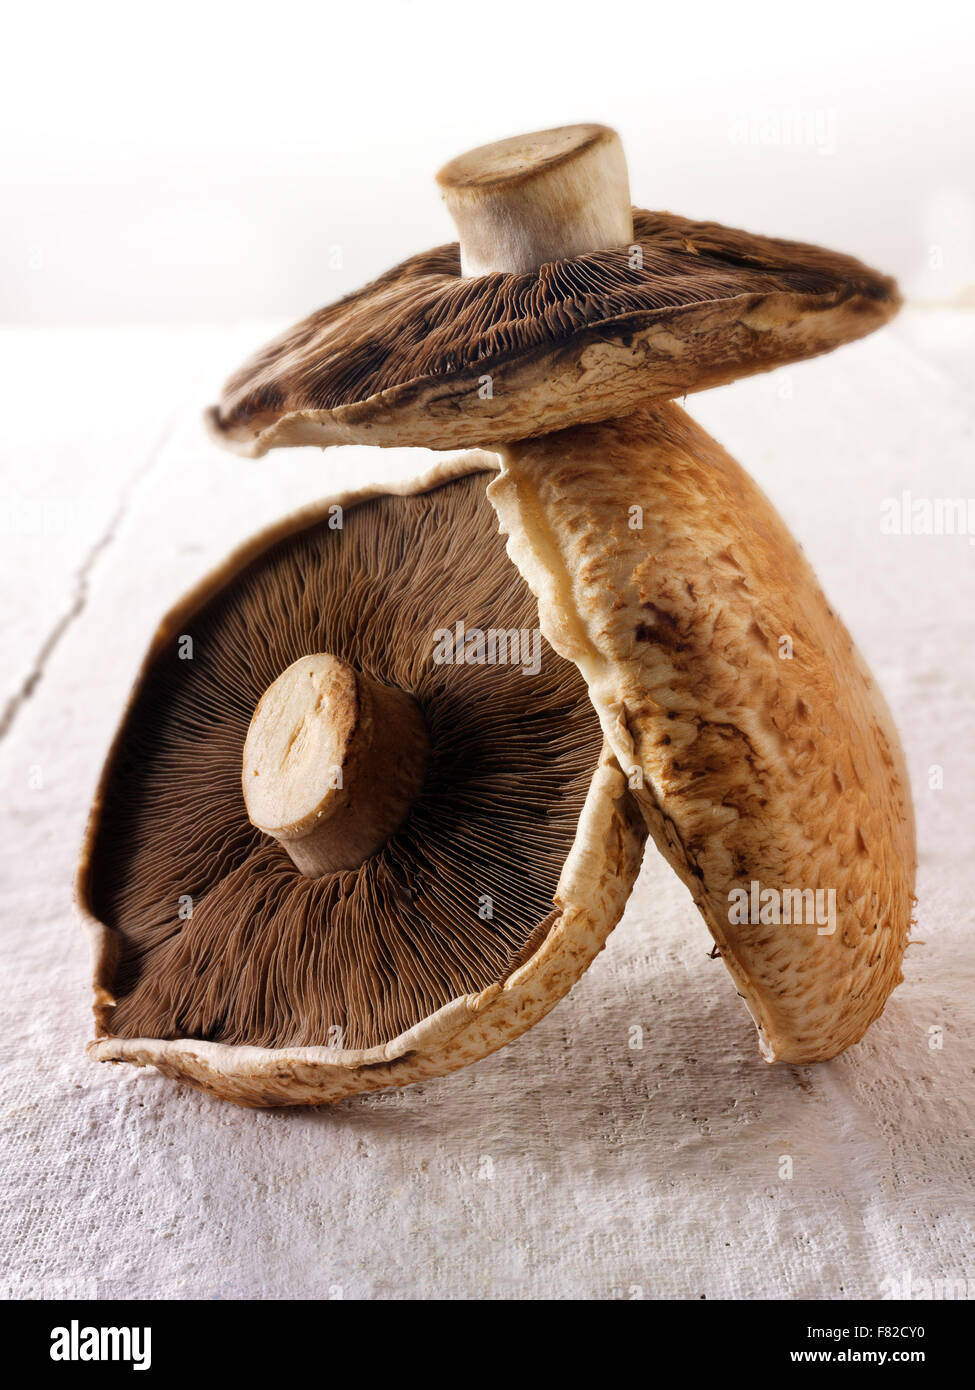 Whole Fresh open capped field mushrooms against a white background Stock Photo